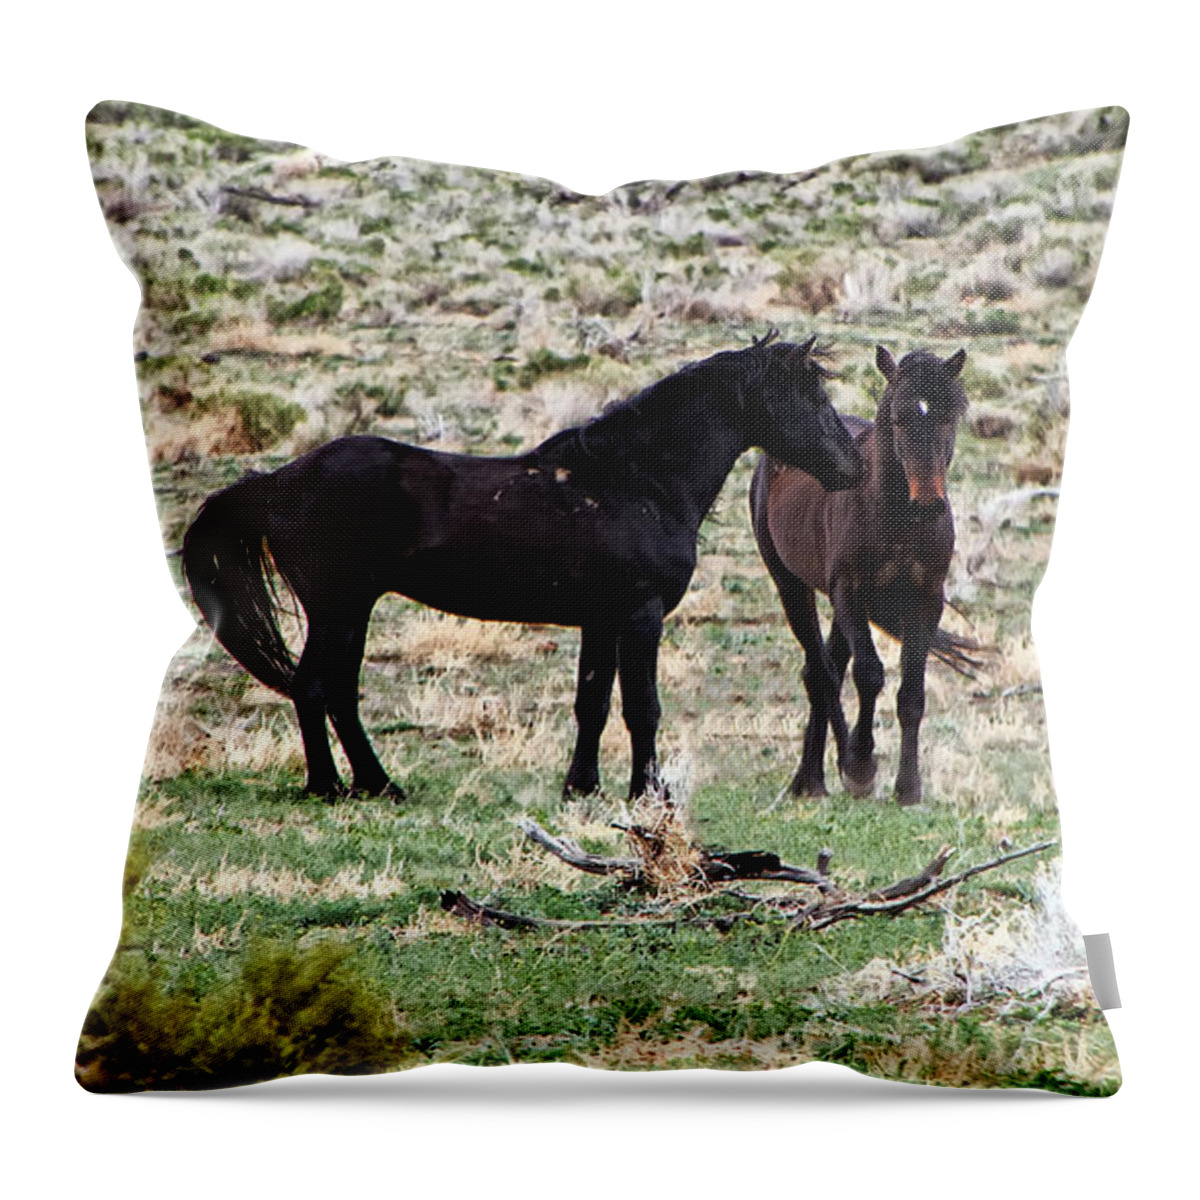 Horses Throw Pillow featuring the photograph Wild Mustang Stallions by Waterdancer